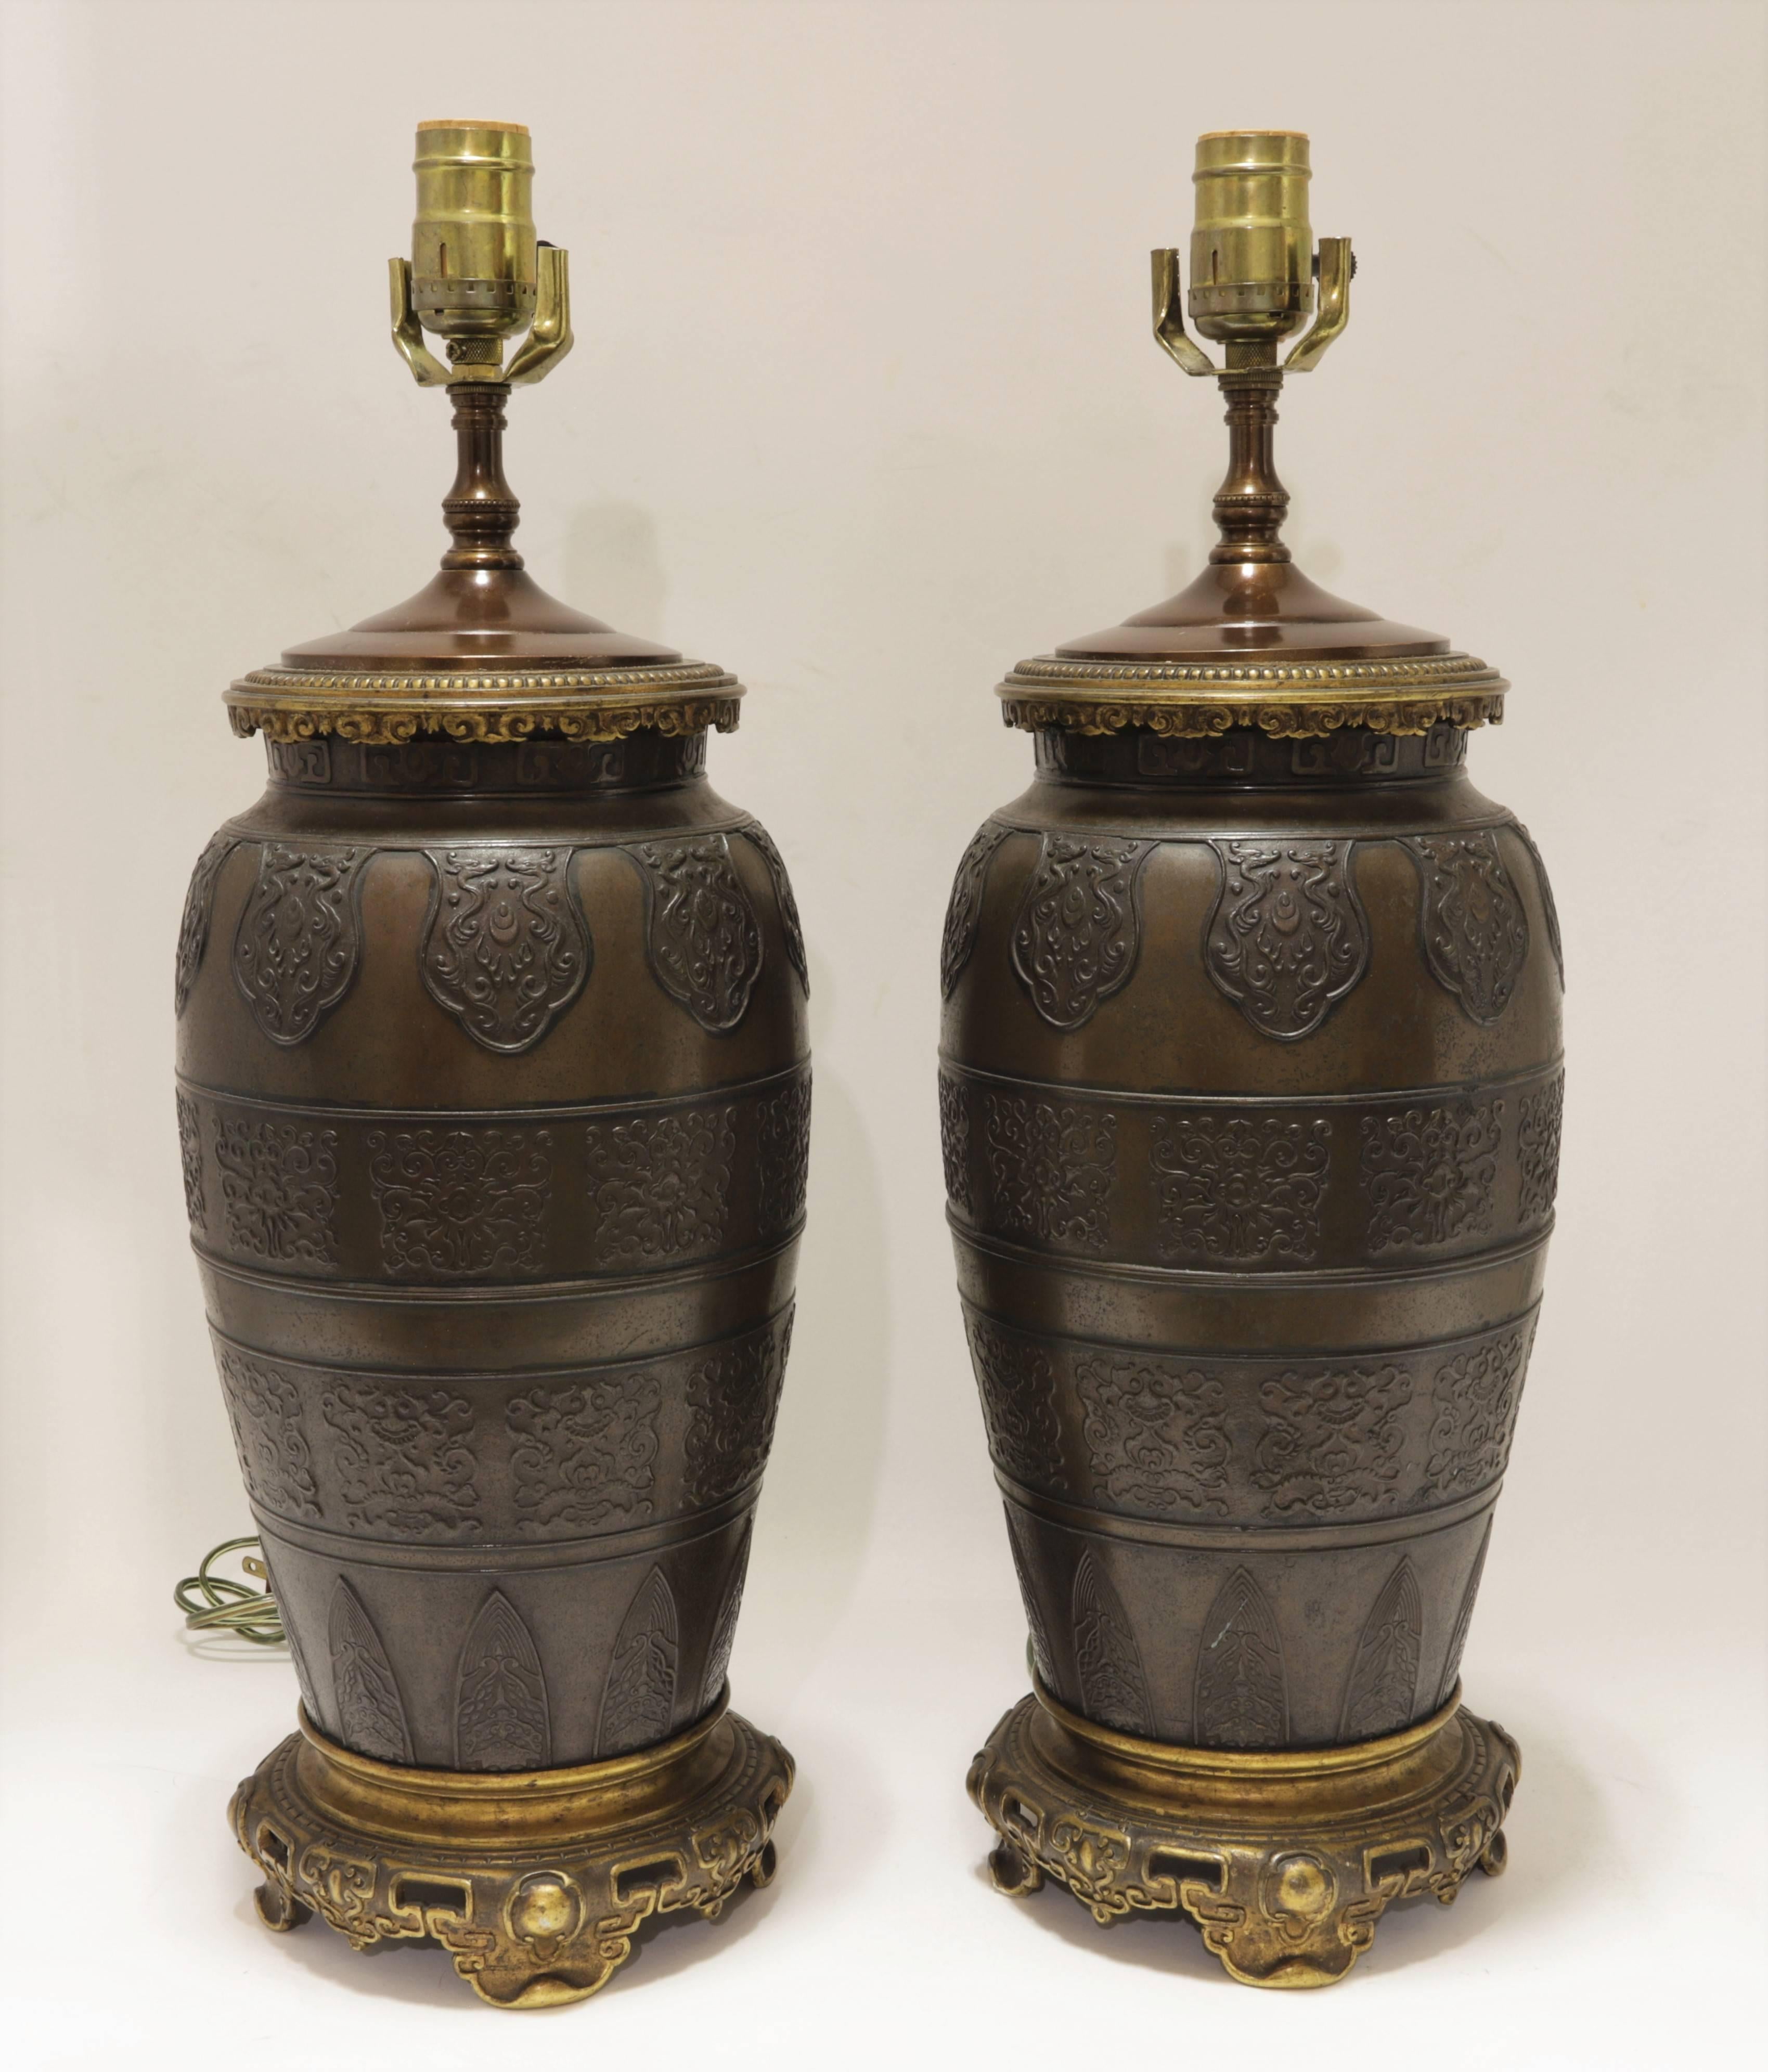 Pair of patinated and gilt bronze lamps in Chinese taste attributed to Caldwell & Co.